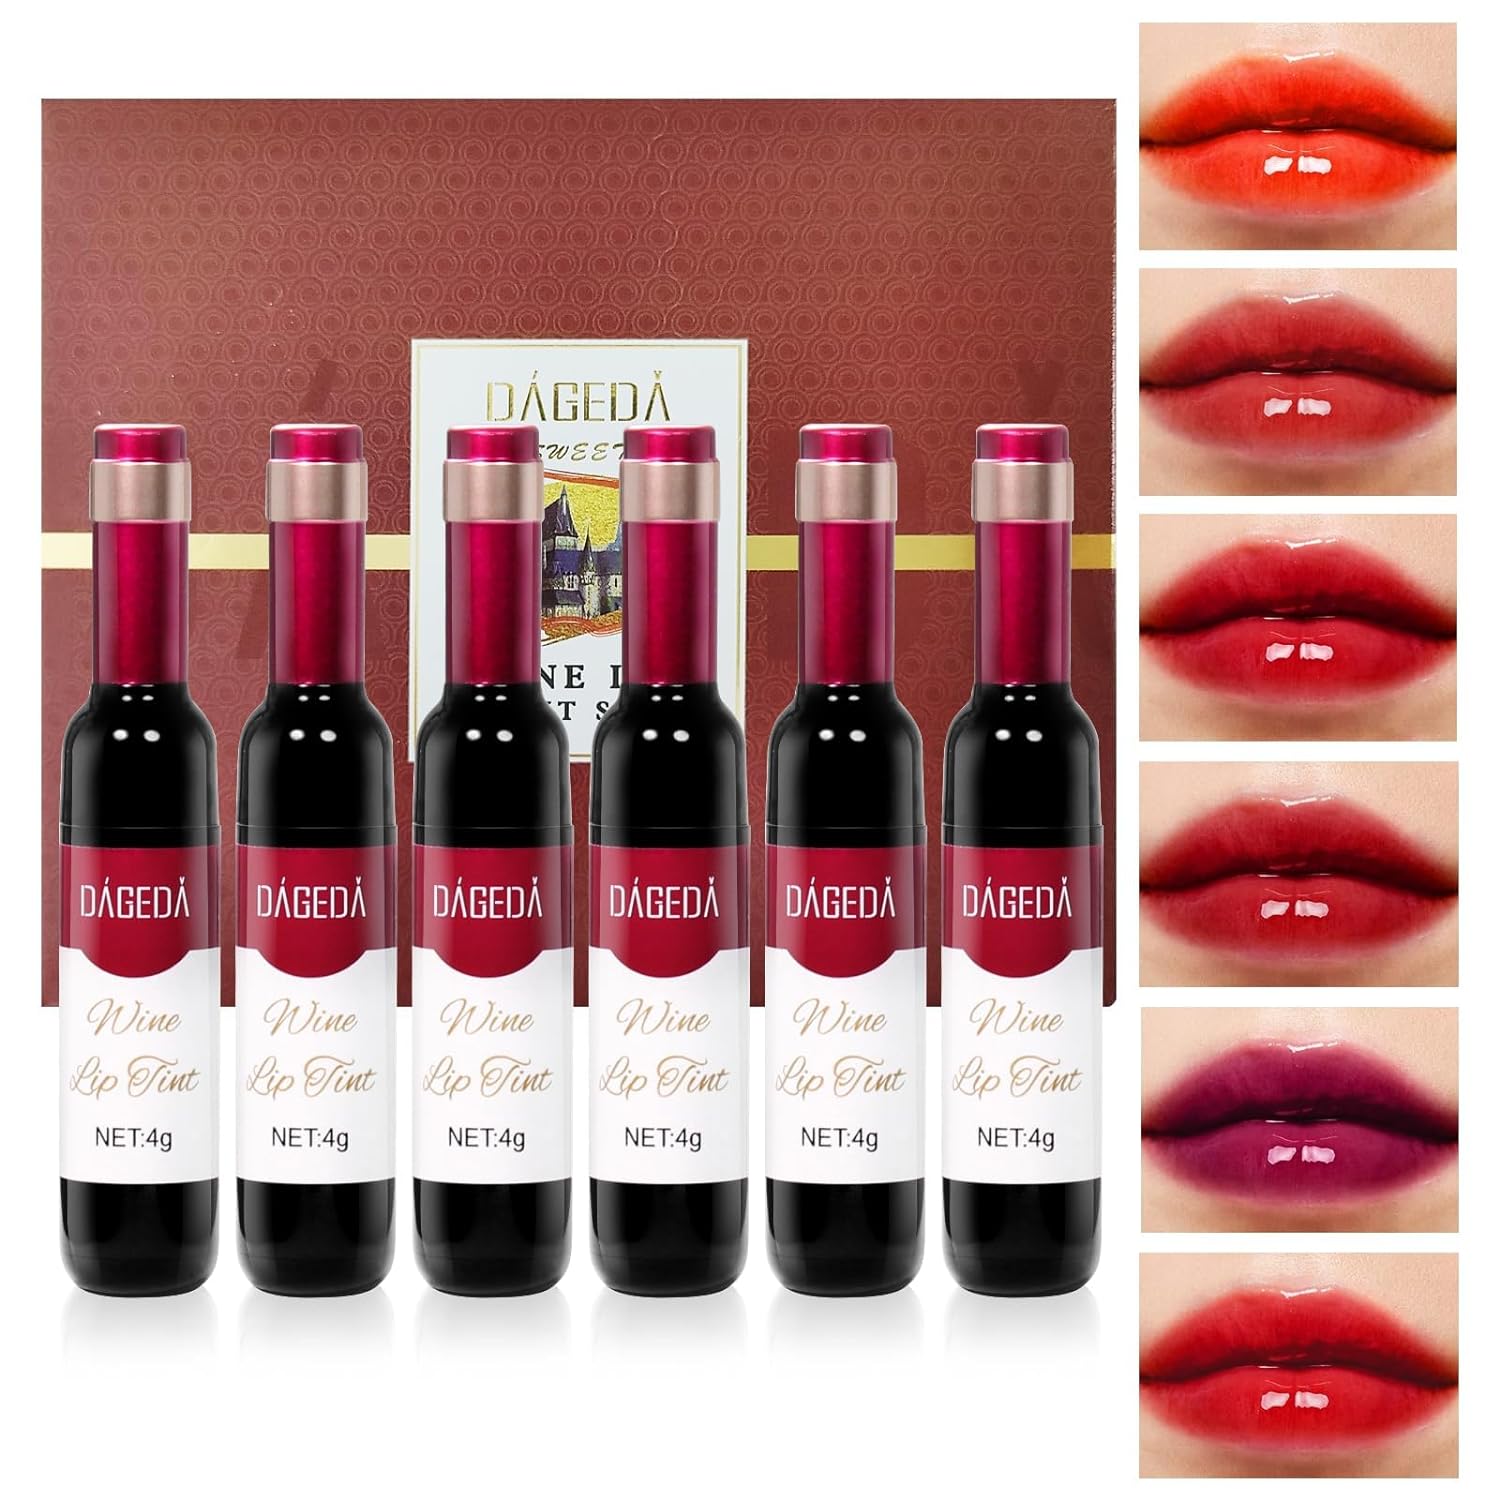 Prreal 6 Colors Wine Lip Tint Stain, Natural Lip Stain Long Lasting Waterproof, Moisturising Red Lip Stain for Lip Makeup, Non-Stick Cup Liquid Wine Lip Tint Set